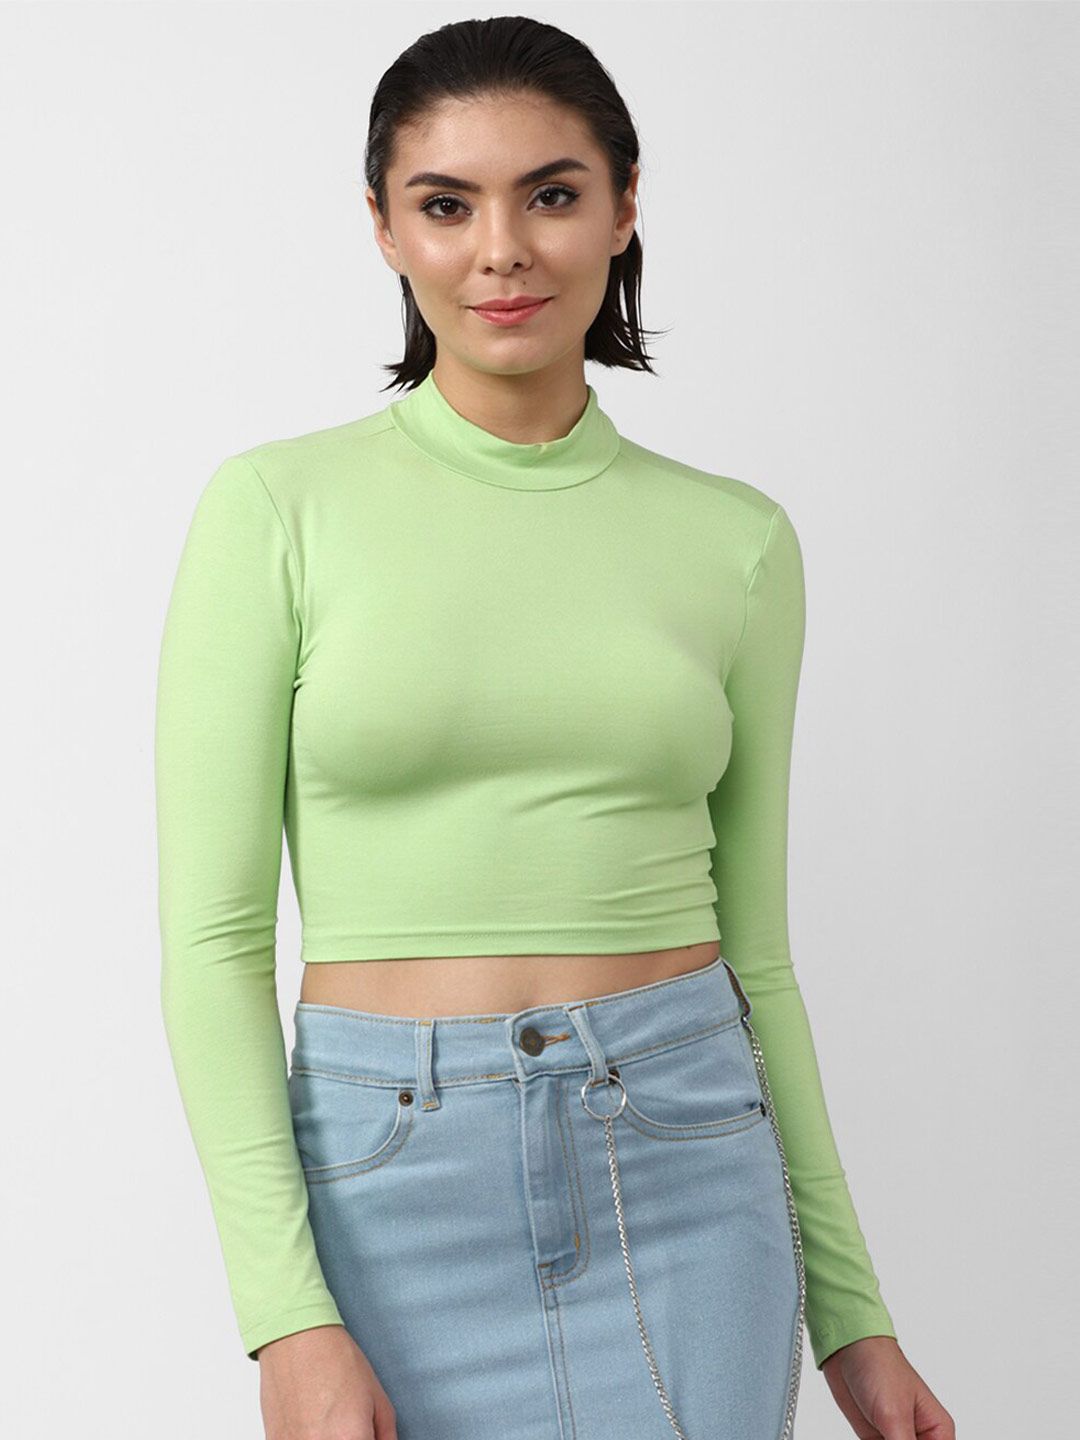 FOREVER 21 Women Lime Green Crop Top Price in India